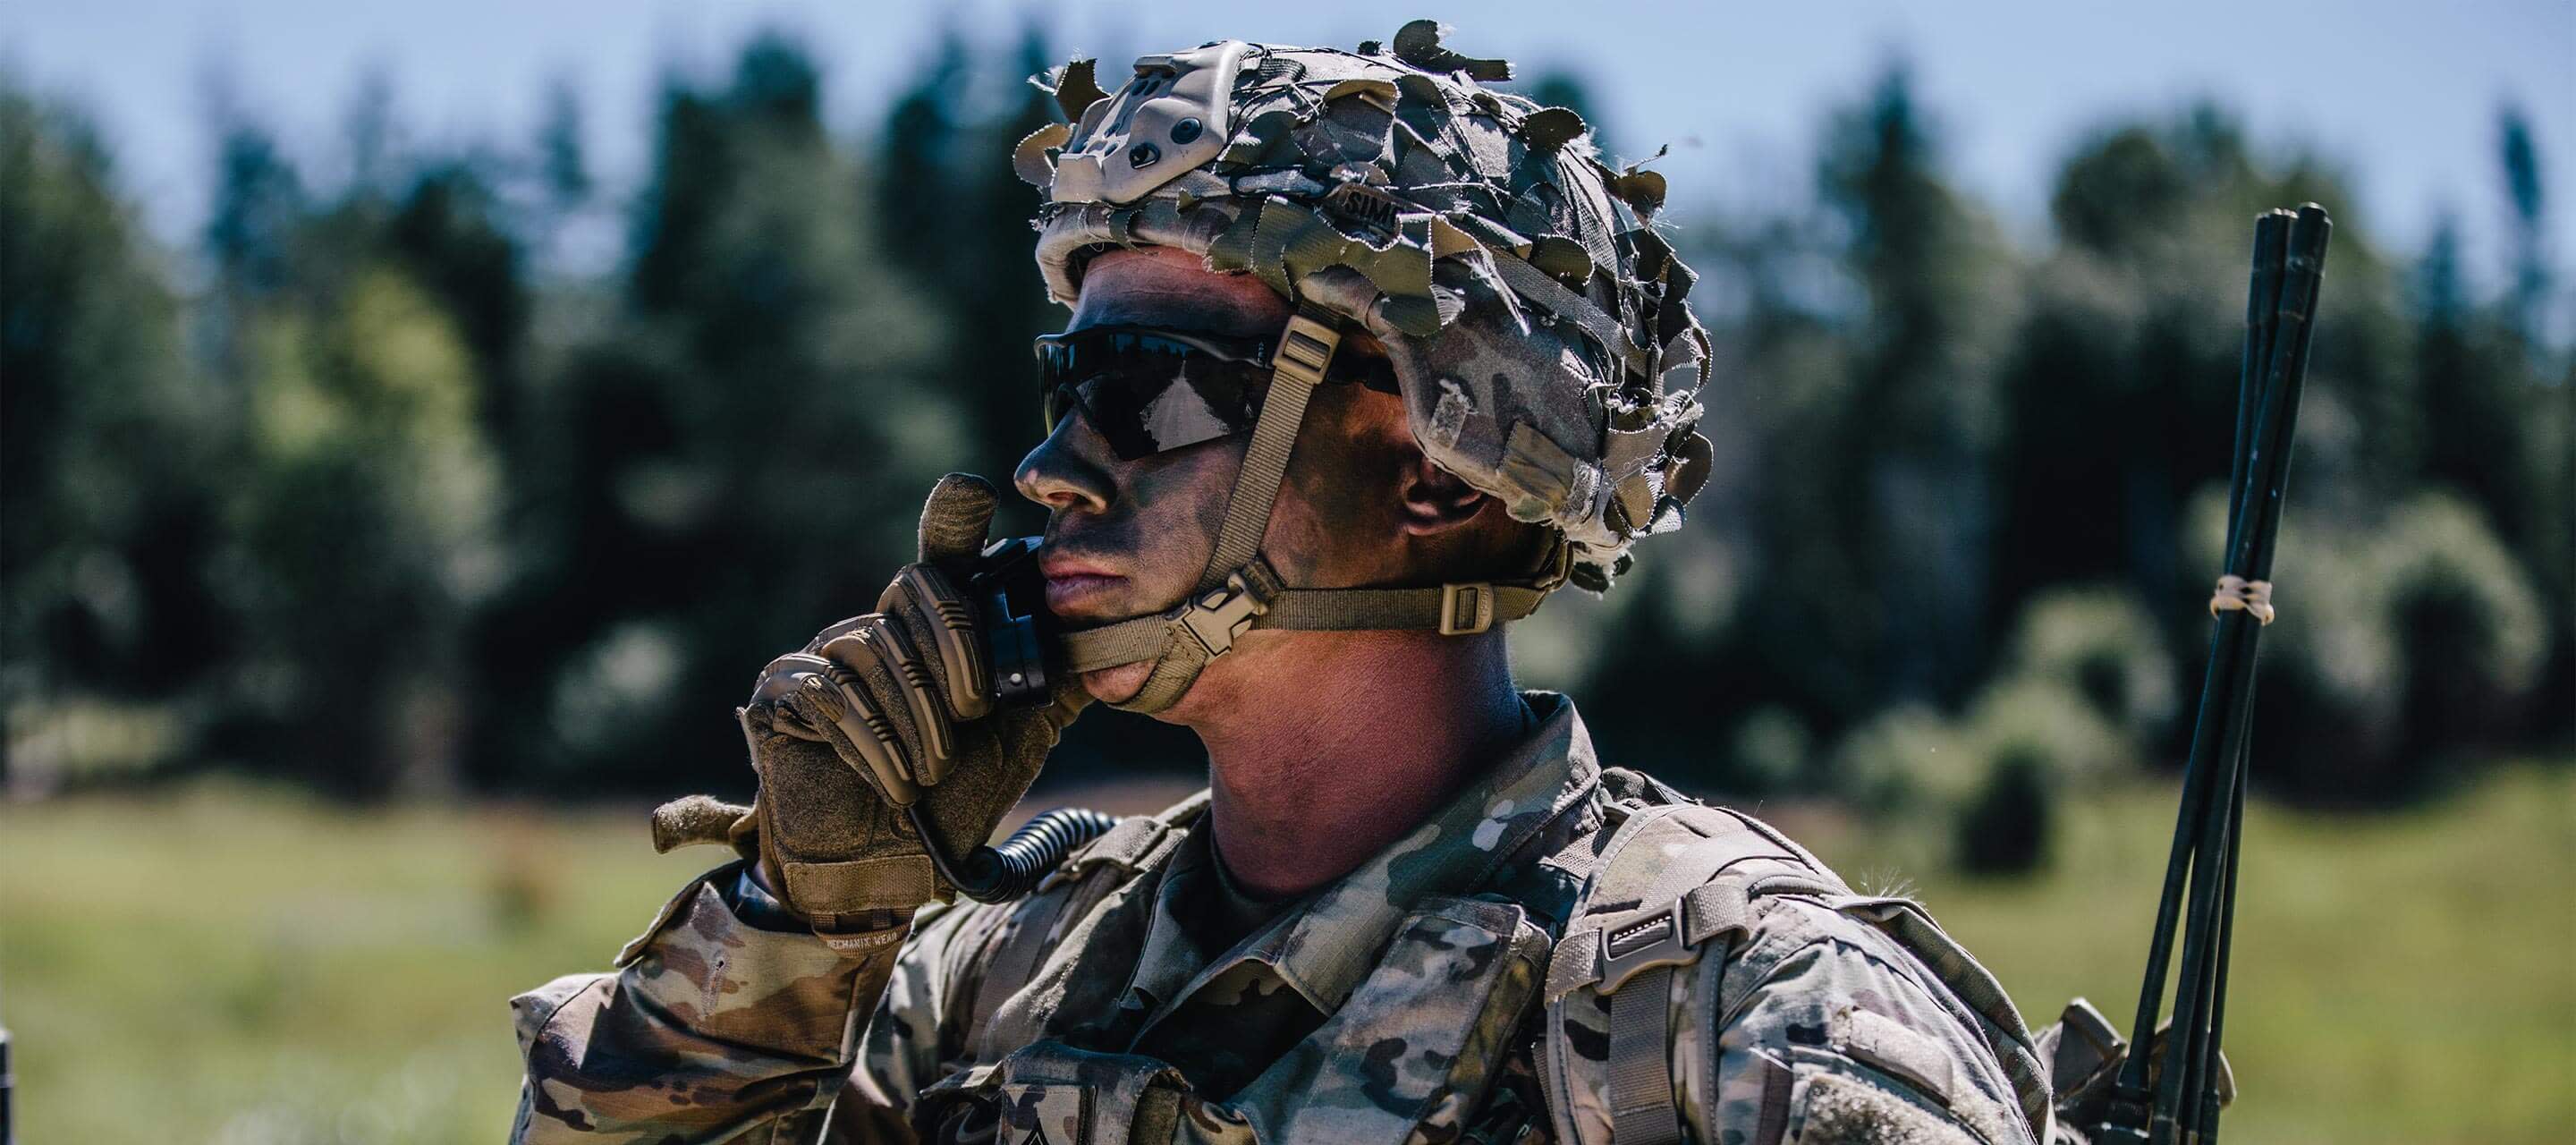 image shows soldier on radio 